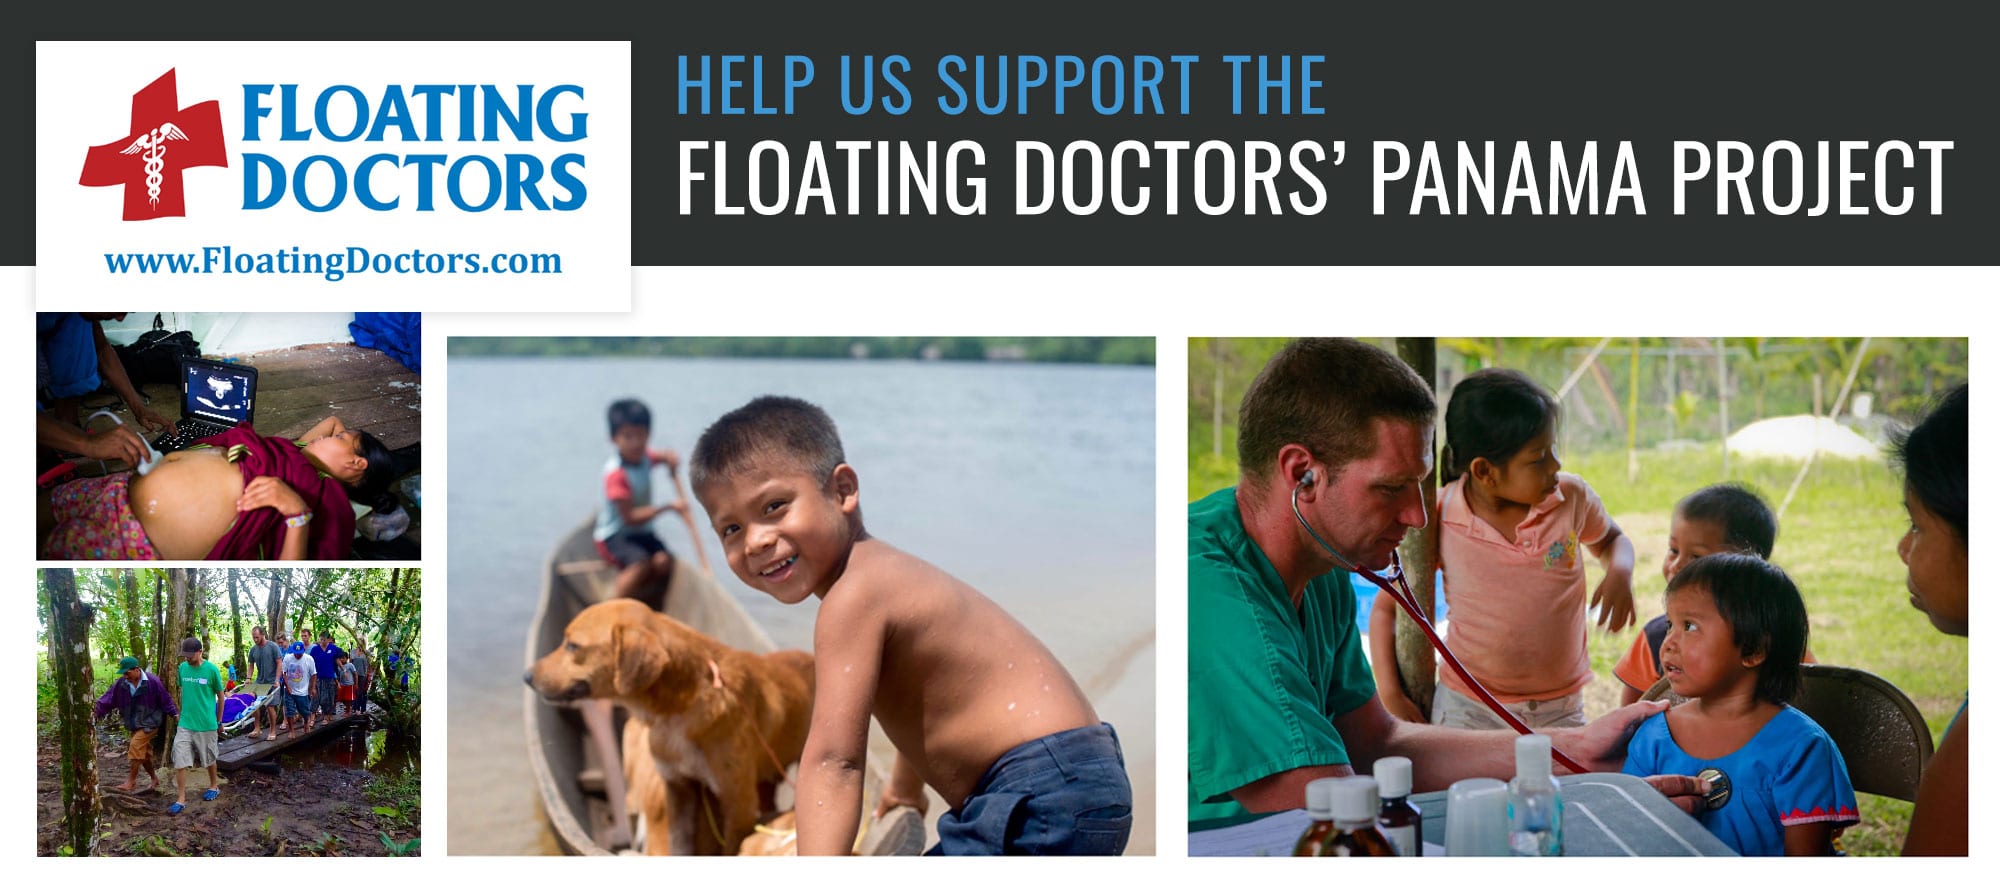 Help us support Floating Doctors' Panama Project